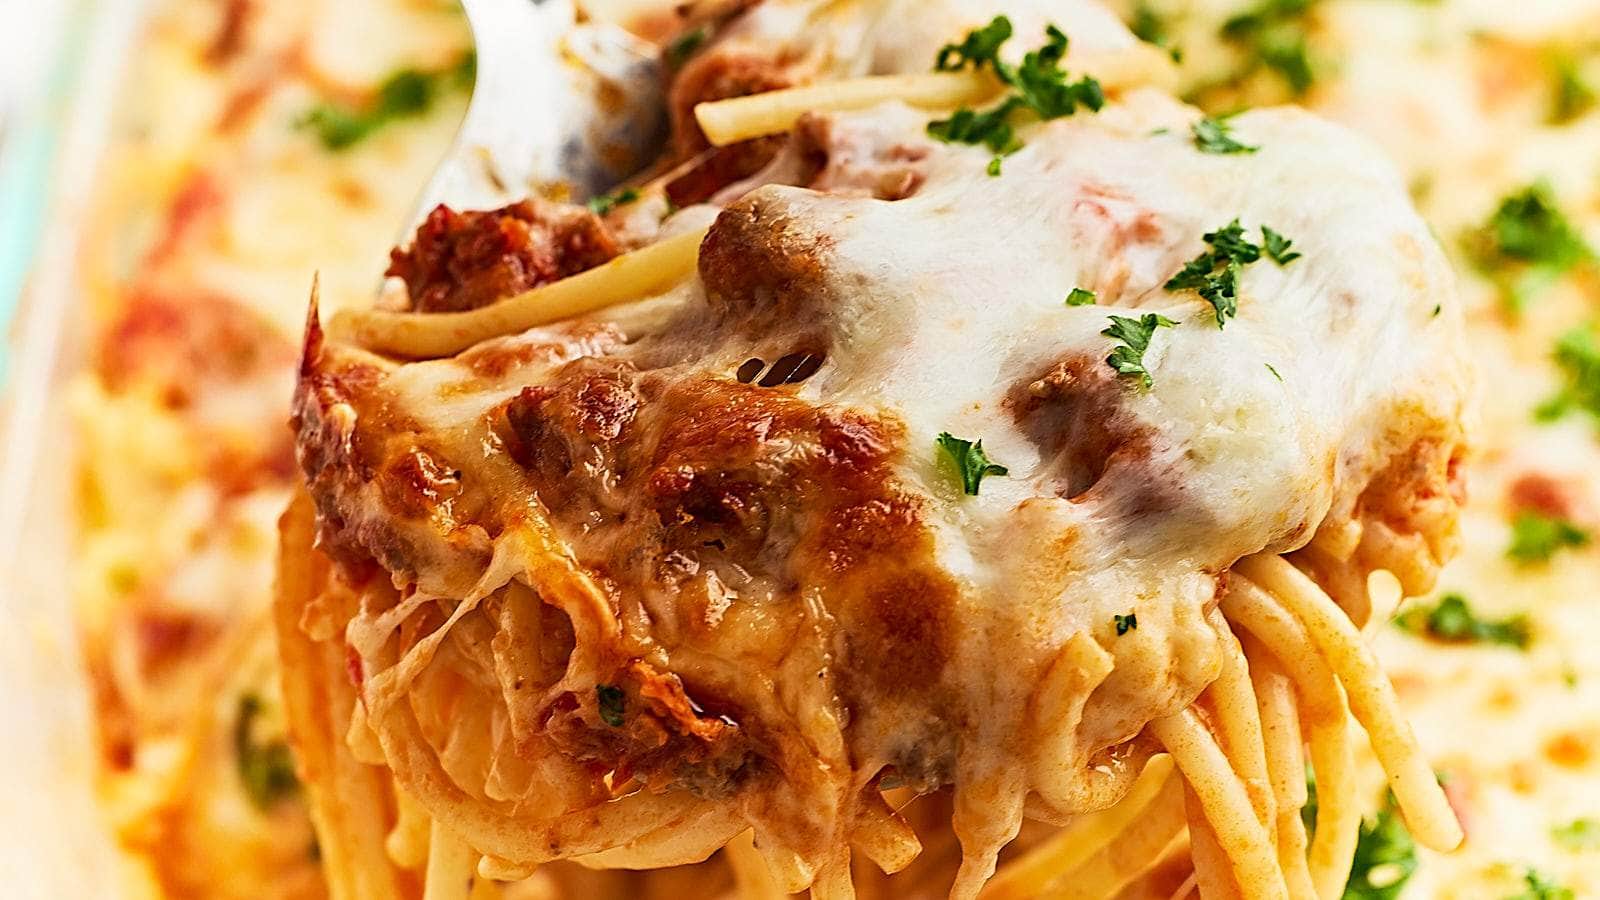 <p>Welcome to the easiest version of the Viral Tiktok Spaghetti pasta recipe. It's the ultimate comfort food – spaghetti, meat, and cheese – transformed into a viral sensation.</p><p><strong>Get the Recipe: <a href="https://cheerfulcook.com/tiktok-spaghetti/" rel="noreferrer noopener">TikTok Casserole</a></strong></p>